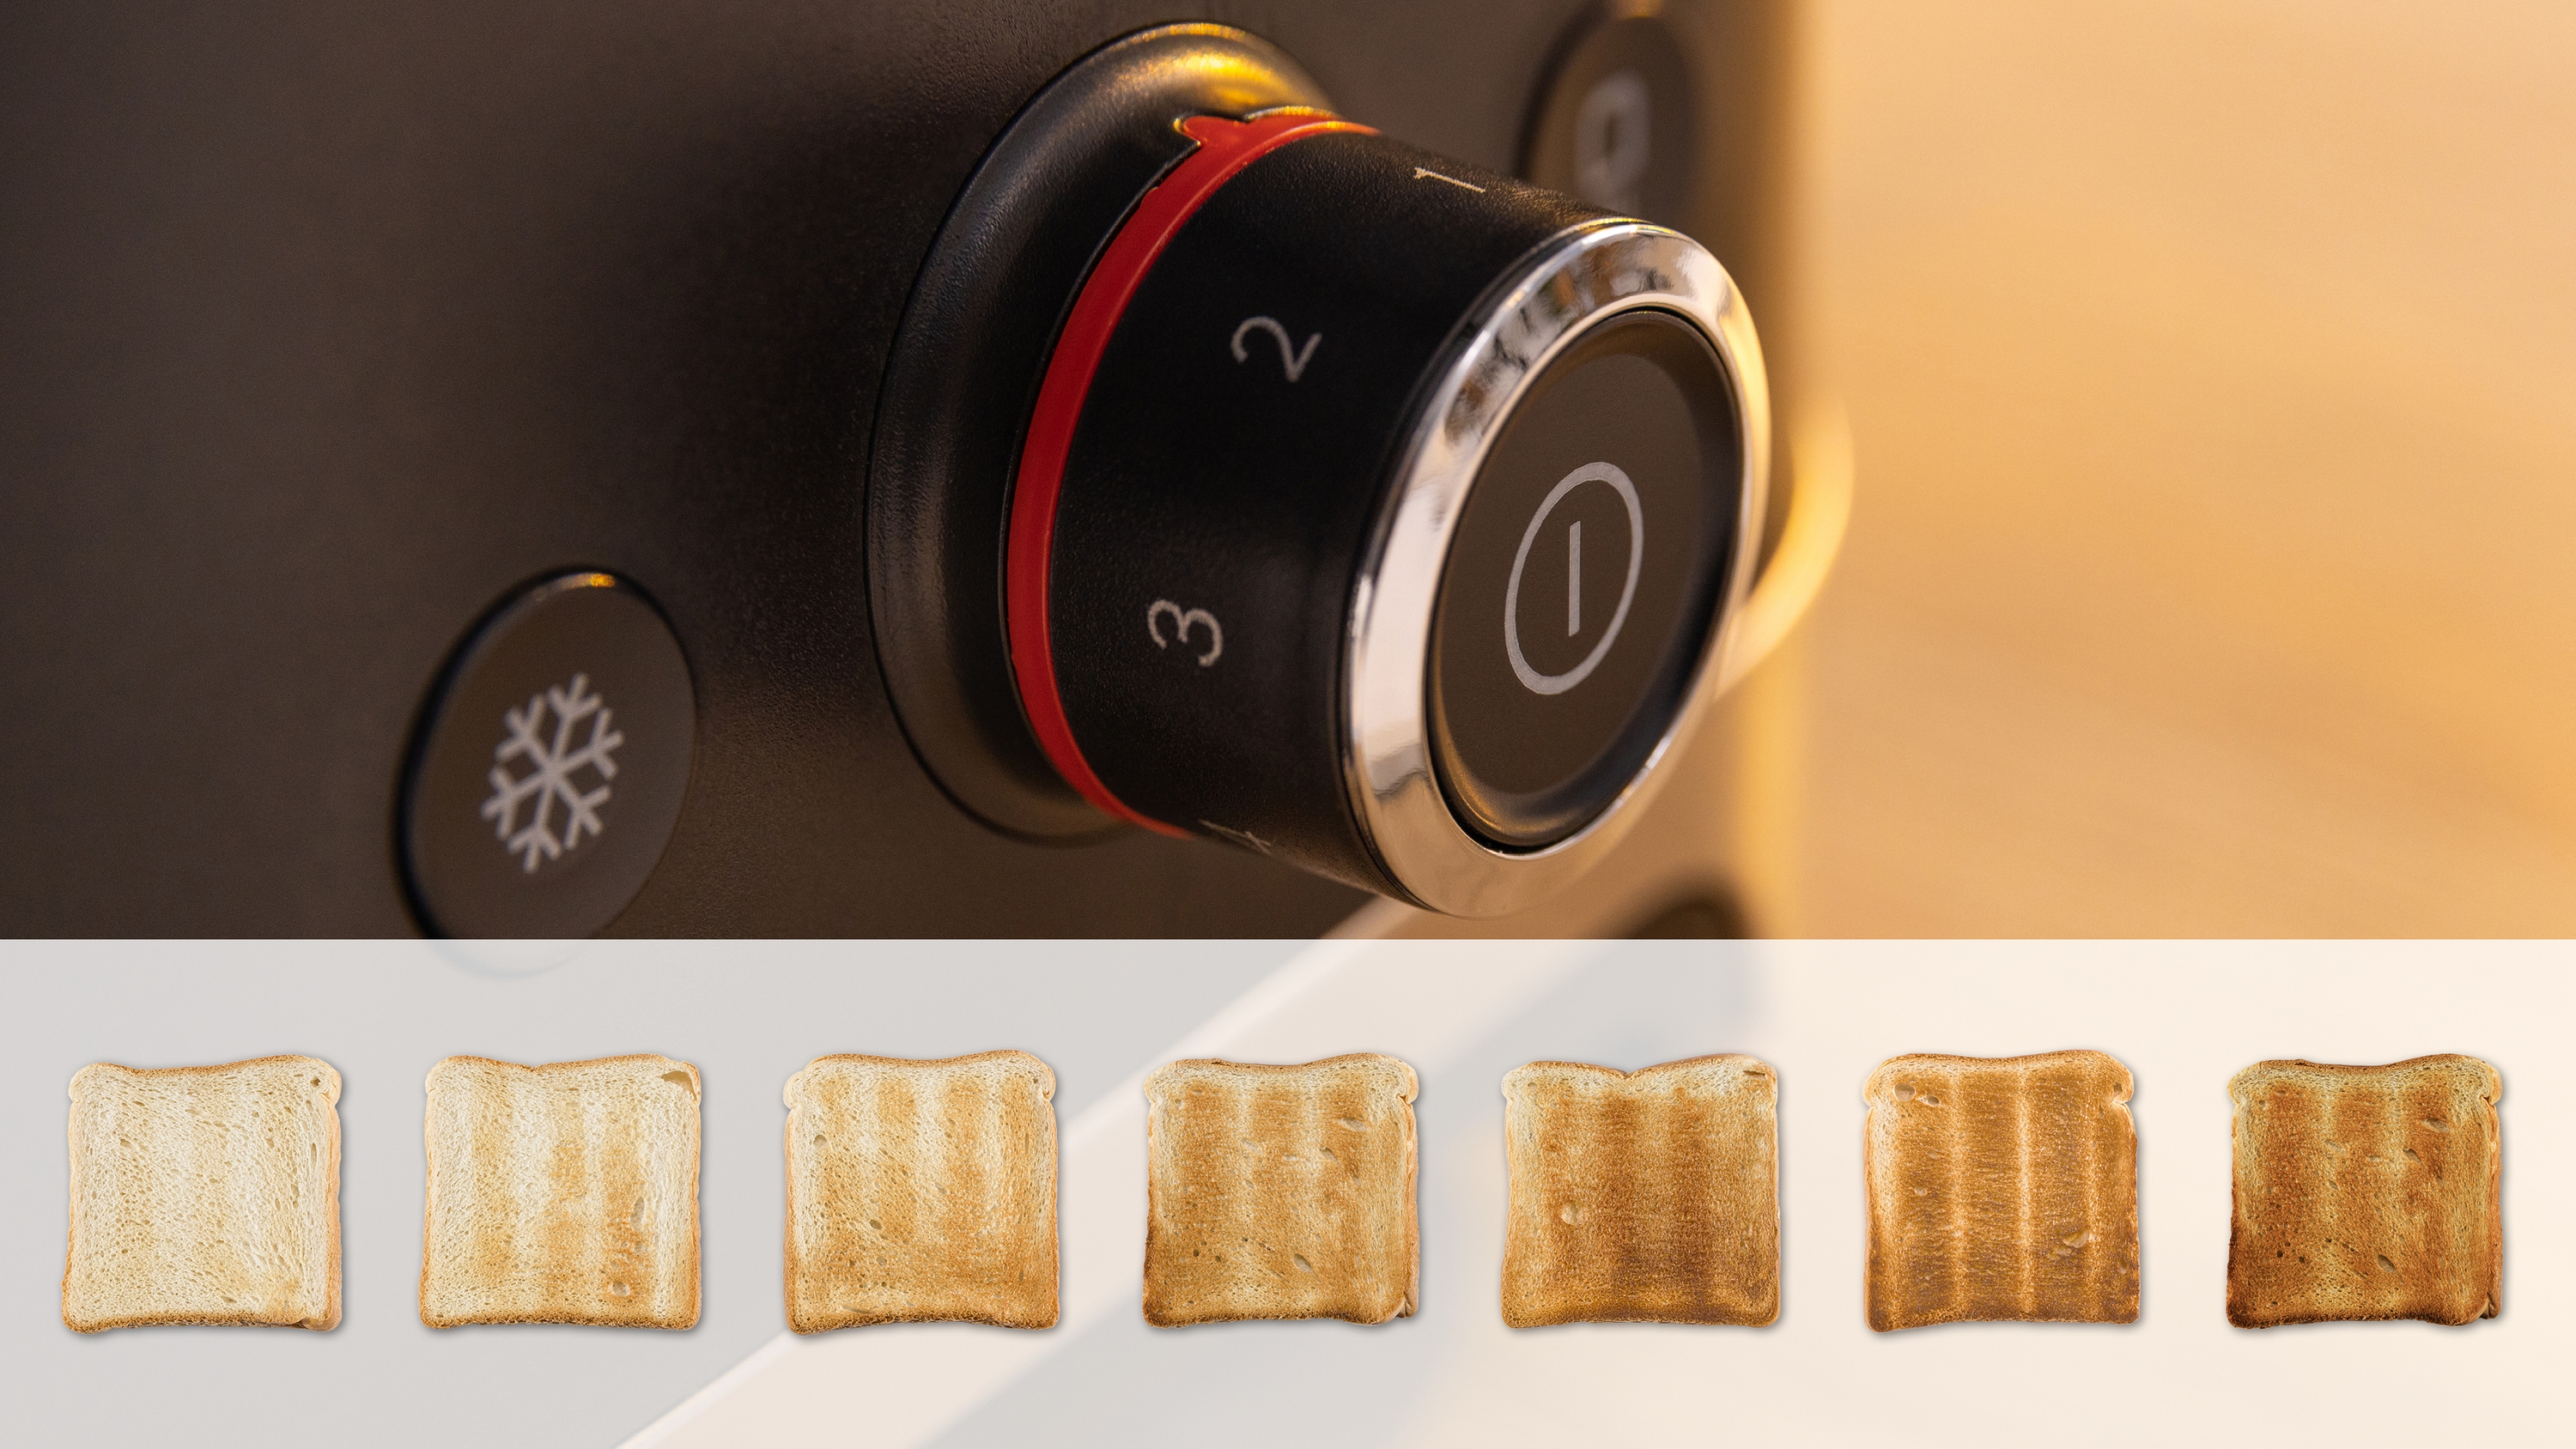 Compact toaster, MyMoment, Black, TAT4M223